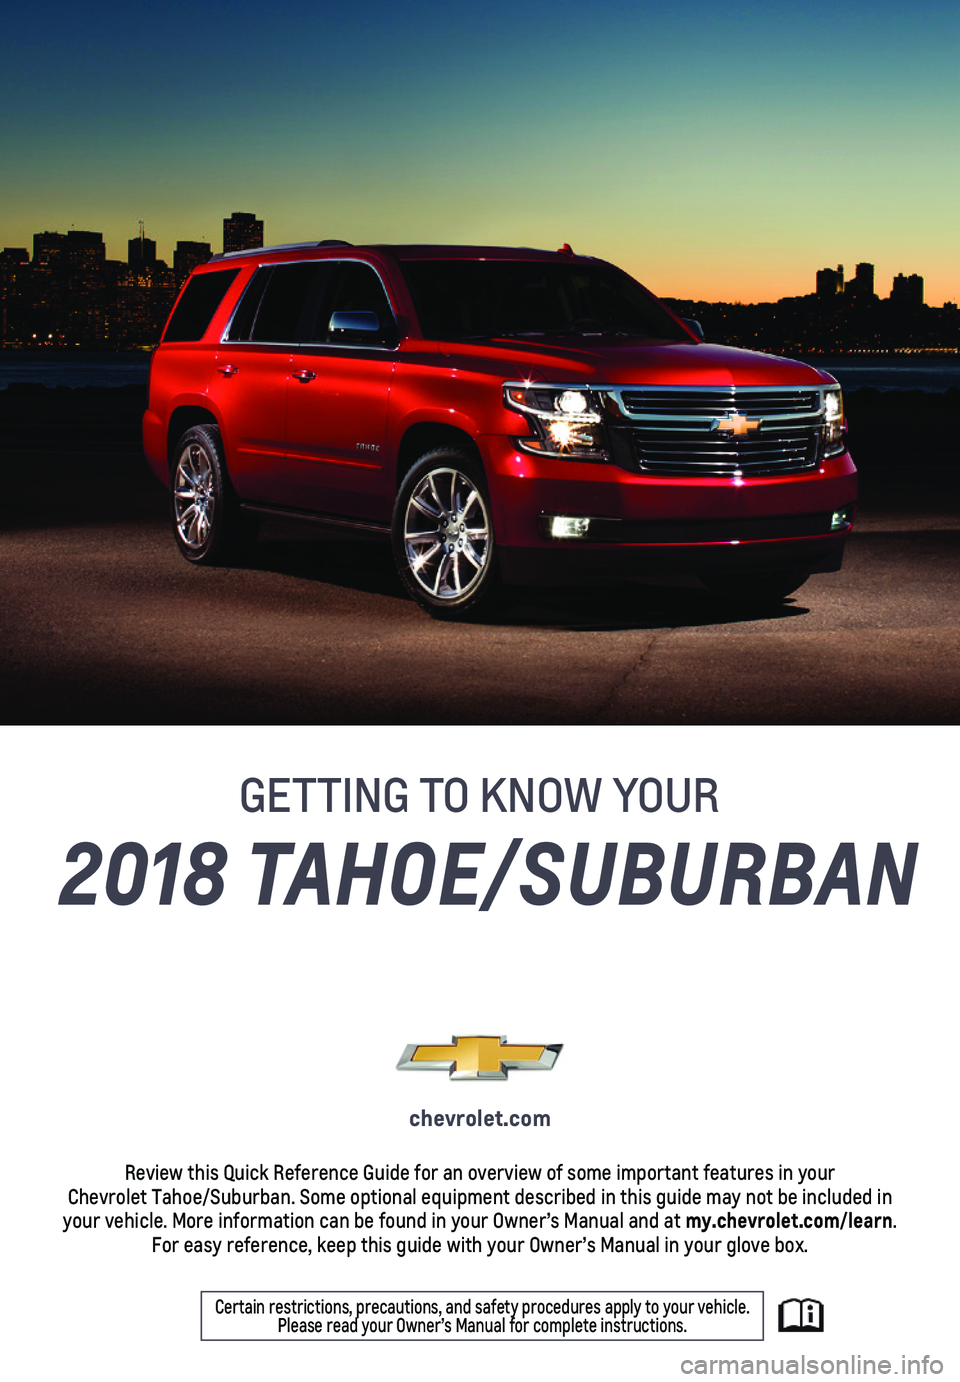 CHEVROLET SUBURBAN 2018  Get To Know Guide 1
2018 TAHOE/SUBURBAN
chevrolet.com
Review this Quick Reference Guide for an overview of some important feat\
ures in your  Chevrolet Tahoe/Suburban. Some optional equipment described in this guid\
e 